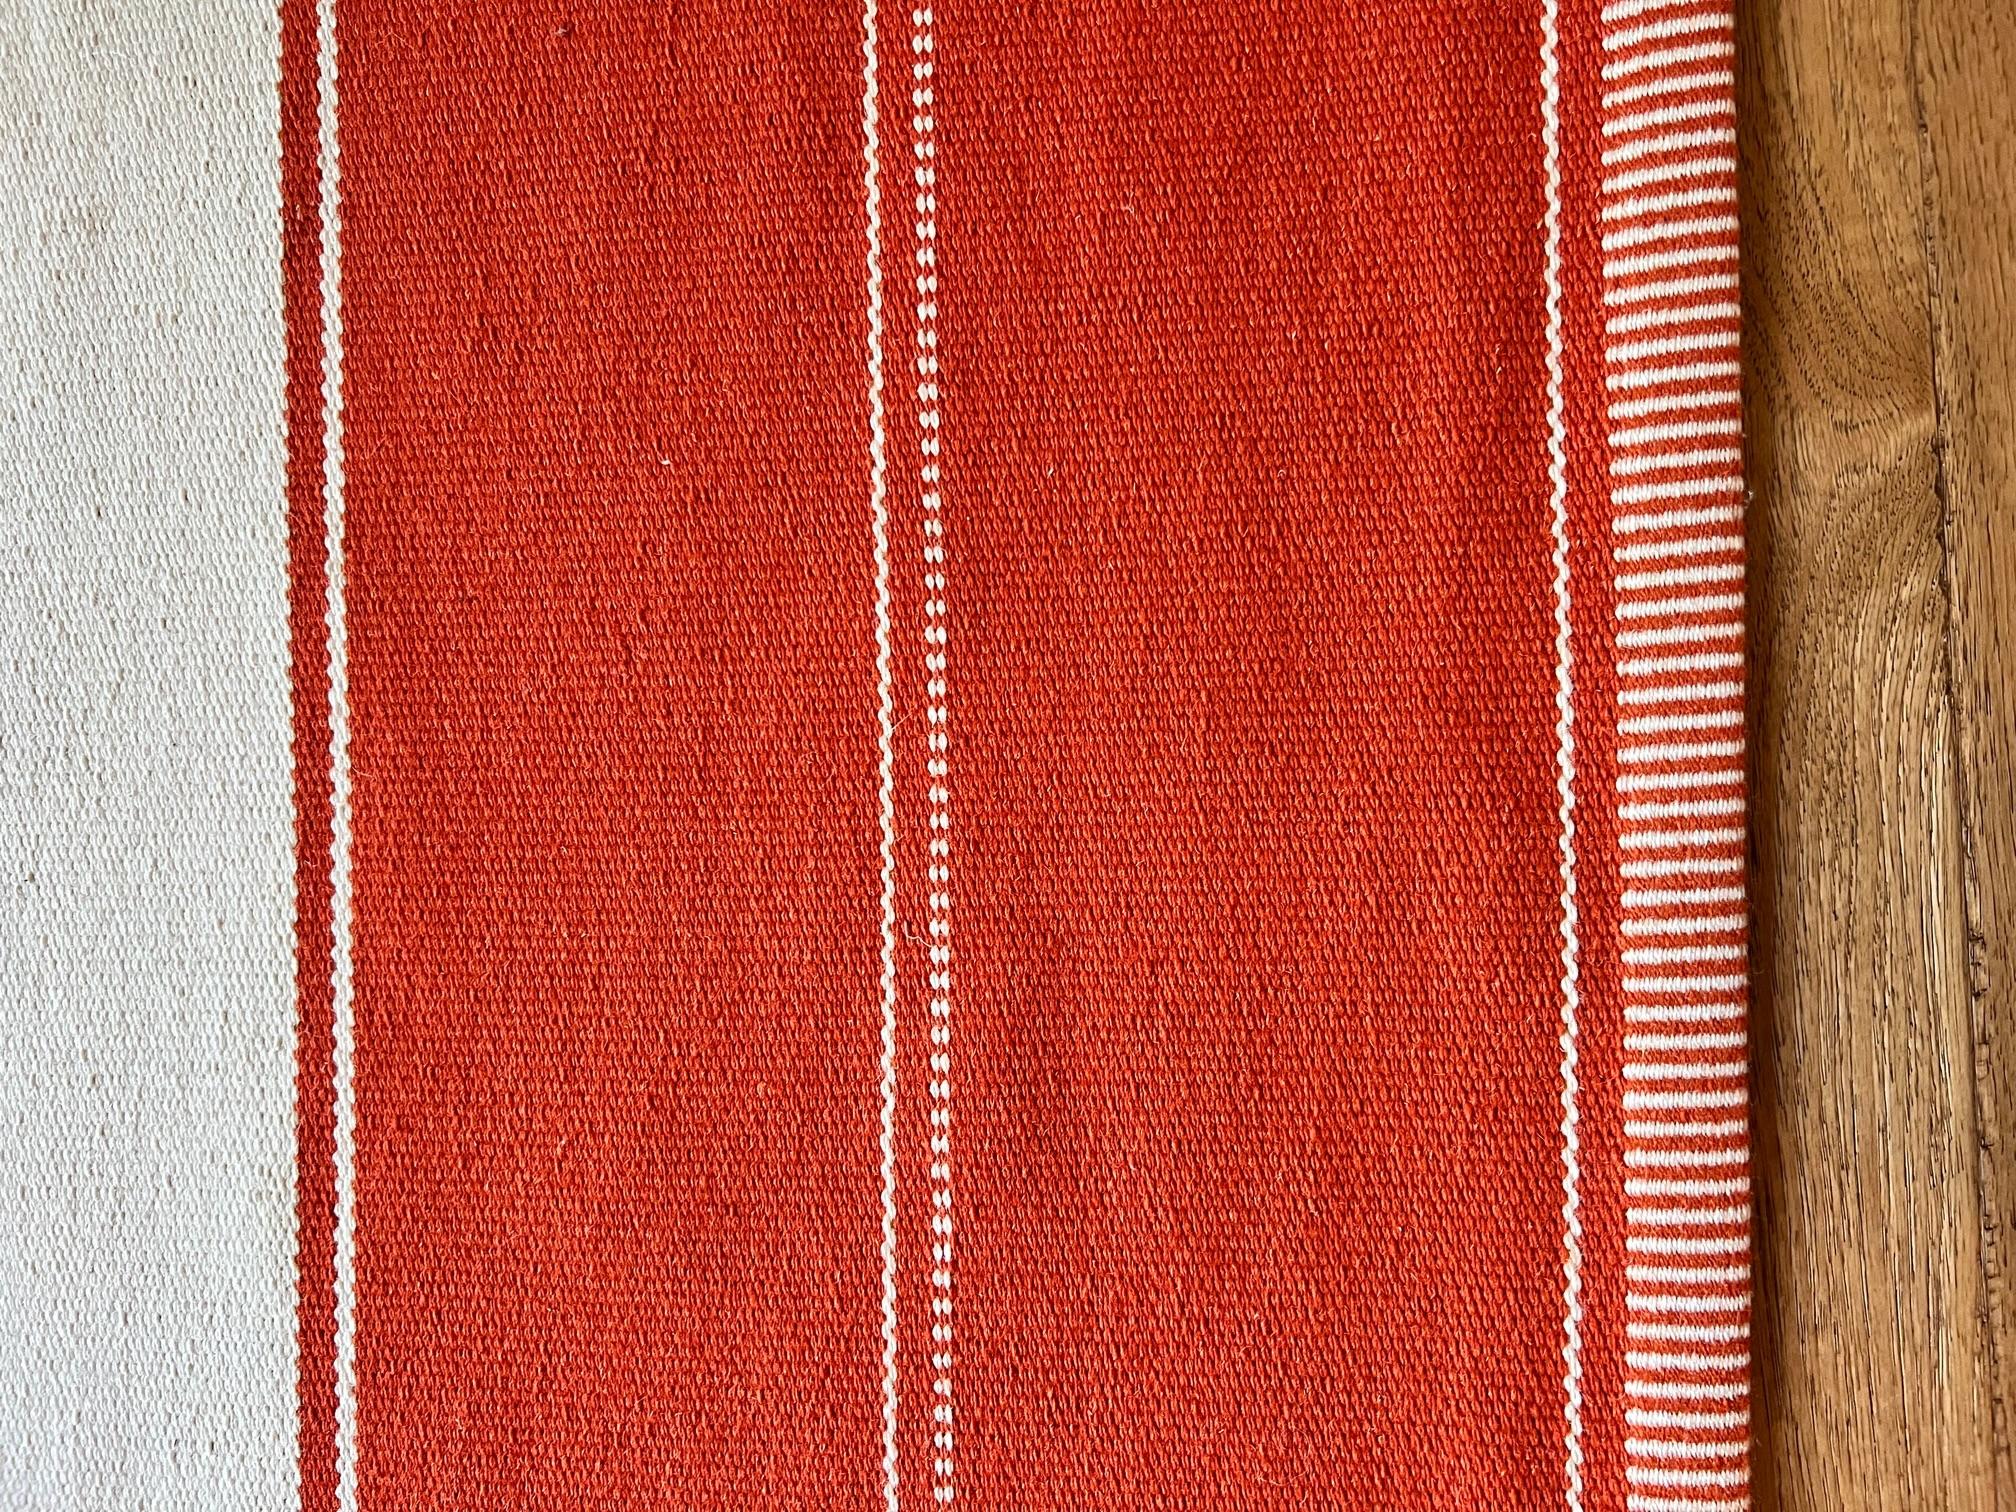 Dark orange and white striped wool rug by renowned Swedish rug manufacturer Kasthall. The design is by lead designer Gunilla Lagerhem Ullberg. This classic wool rug is made according to old Swedish weaving traditions. Available for customization in